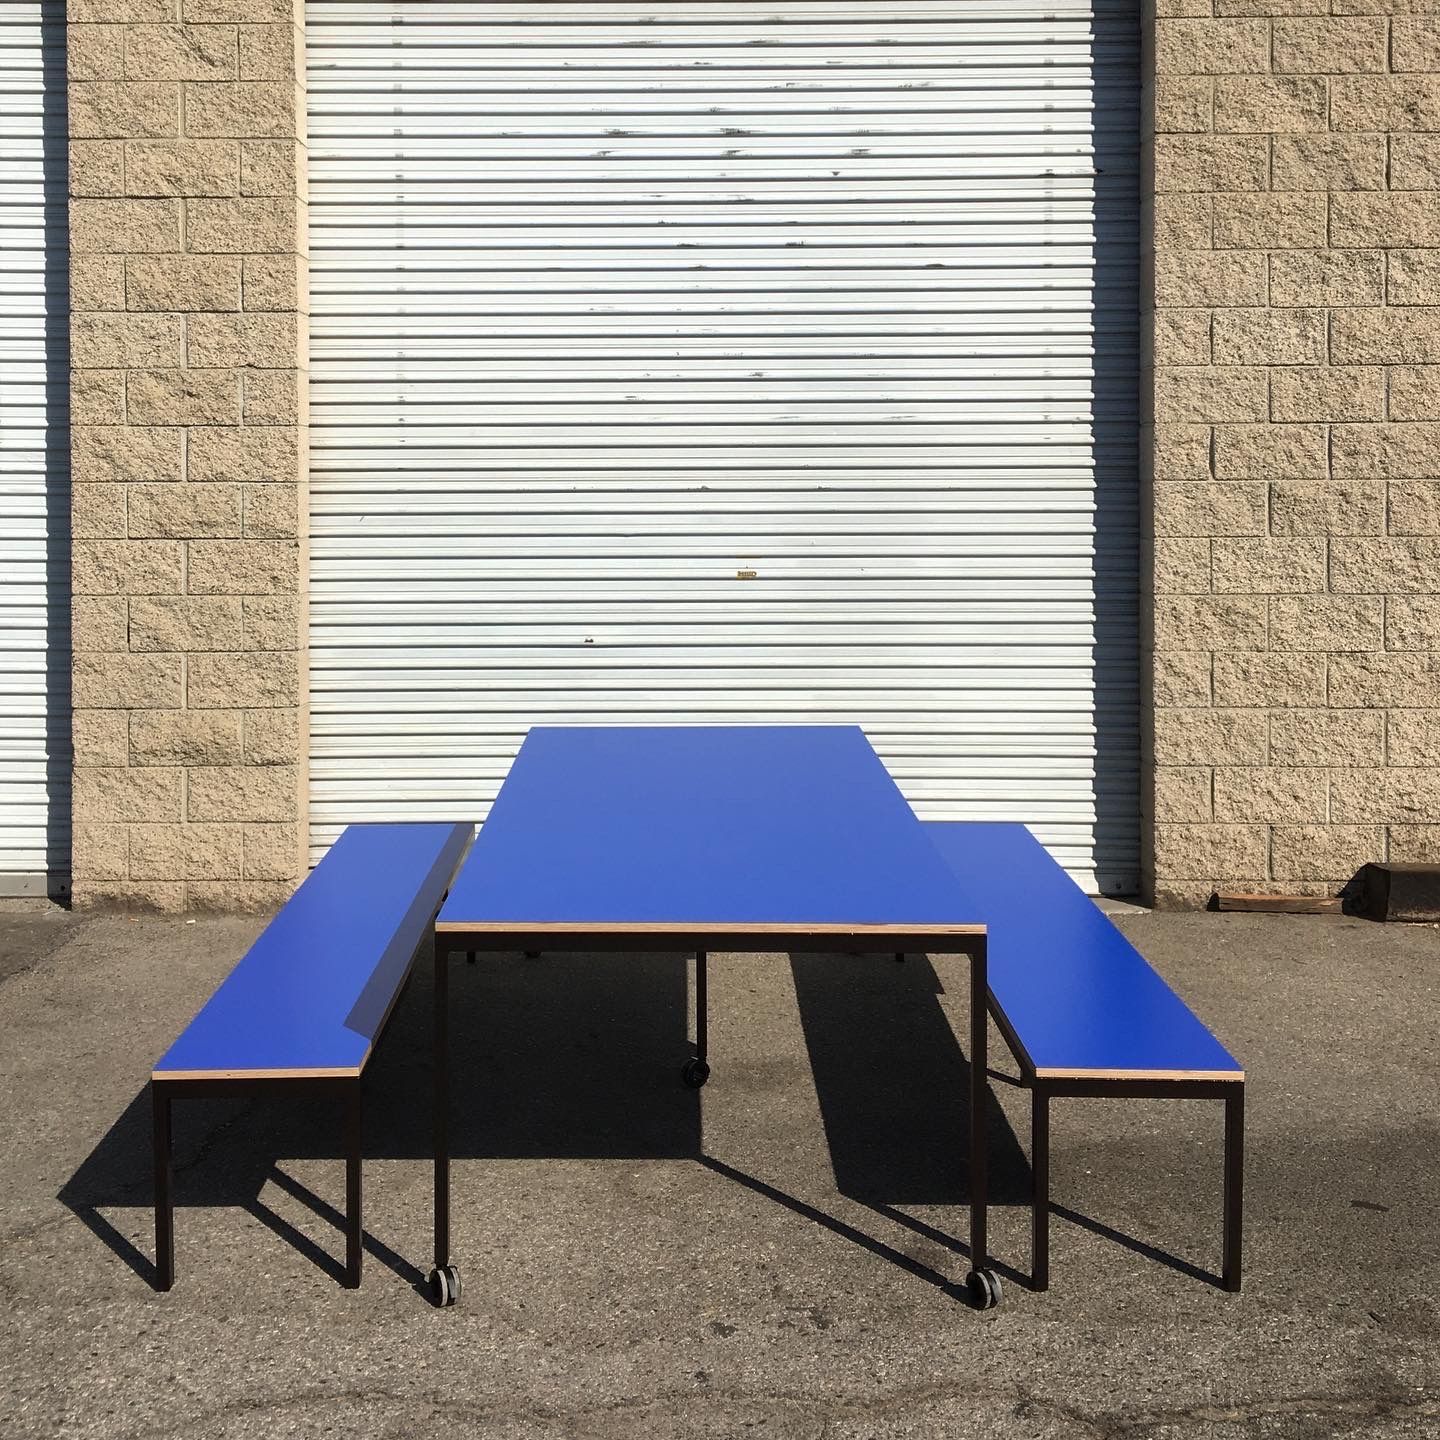  Steel Frame Rectangle Table Set product image 1